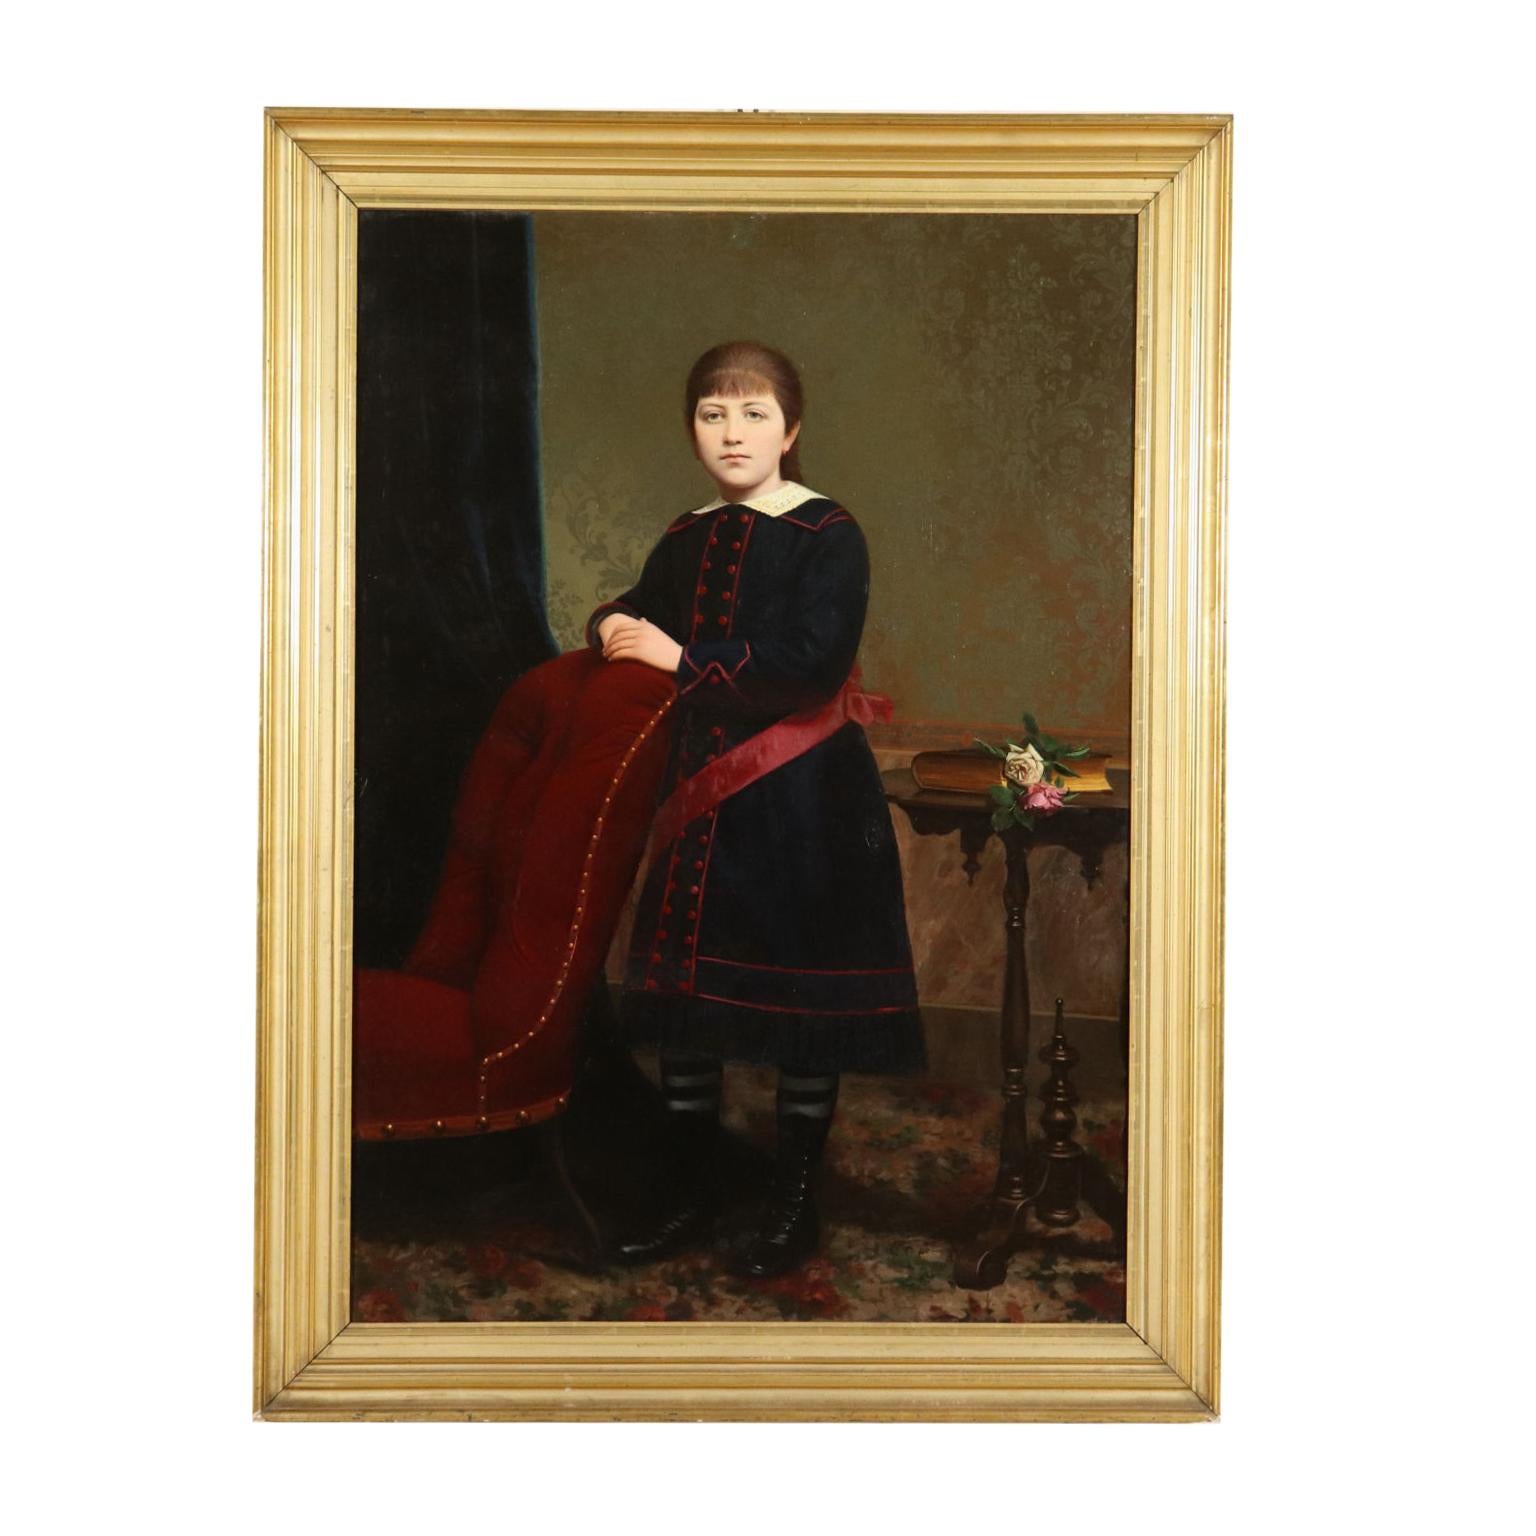 Unknown Portrait Painting - Portray of Young Girl Oil on Canvas 19th Century